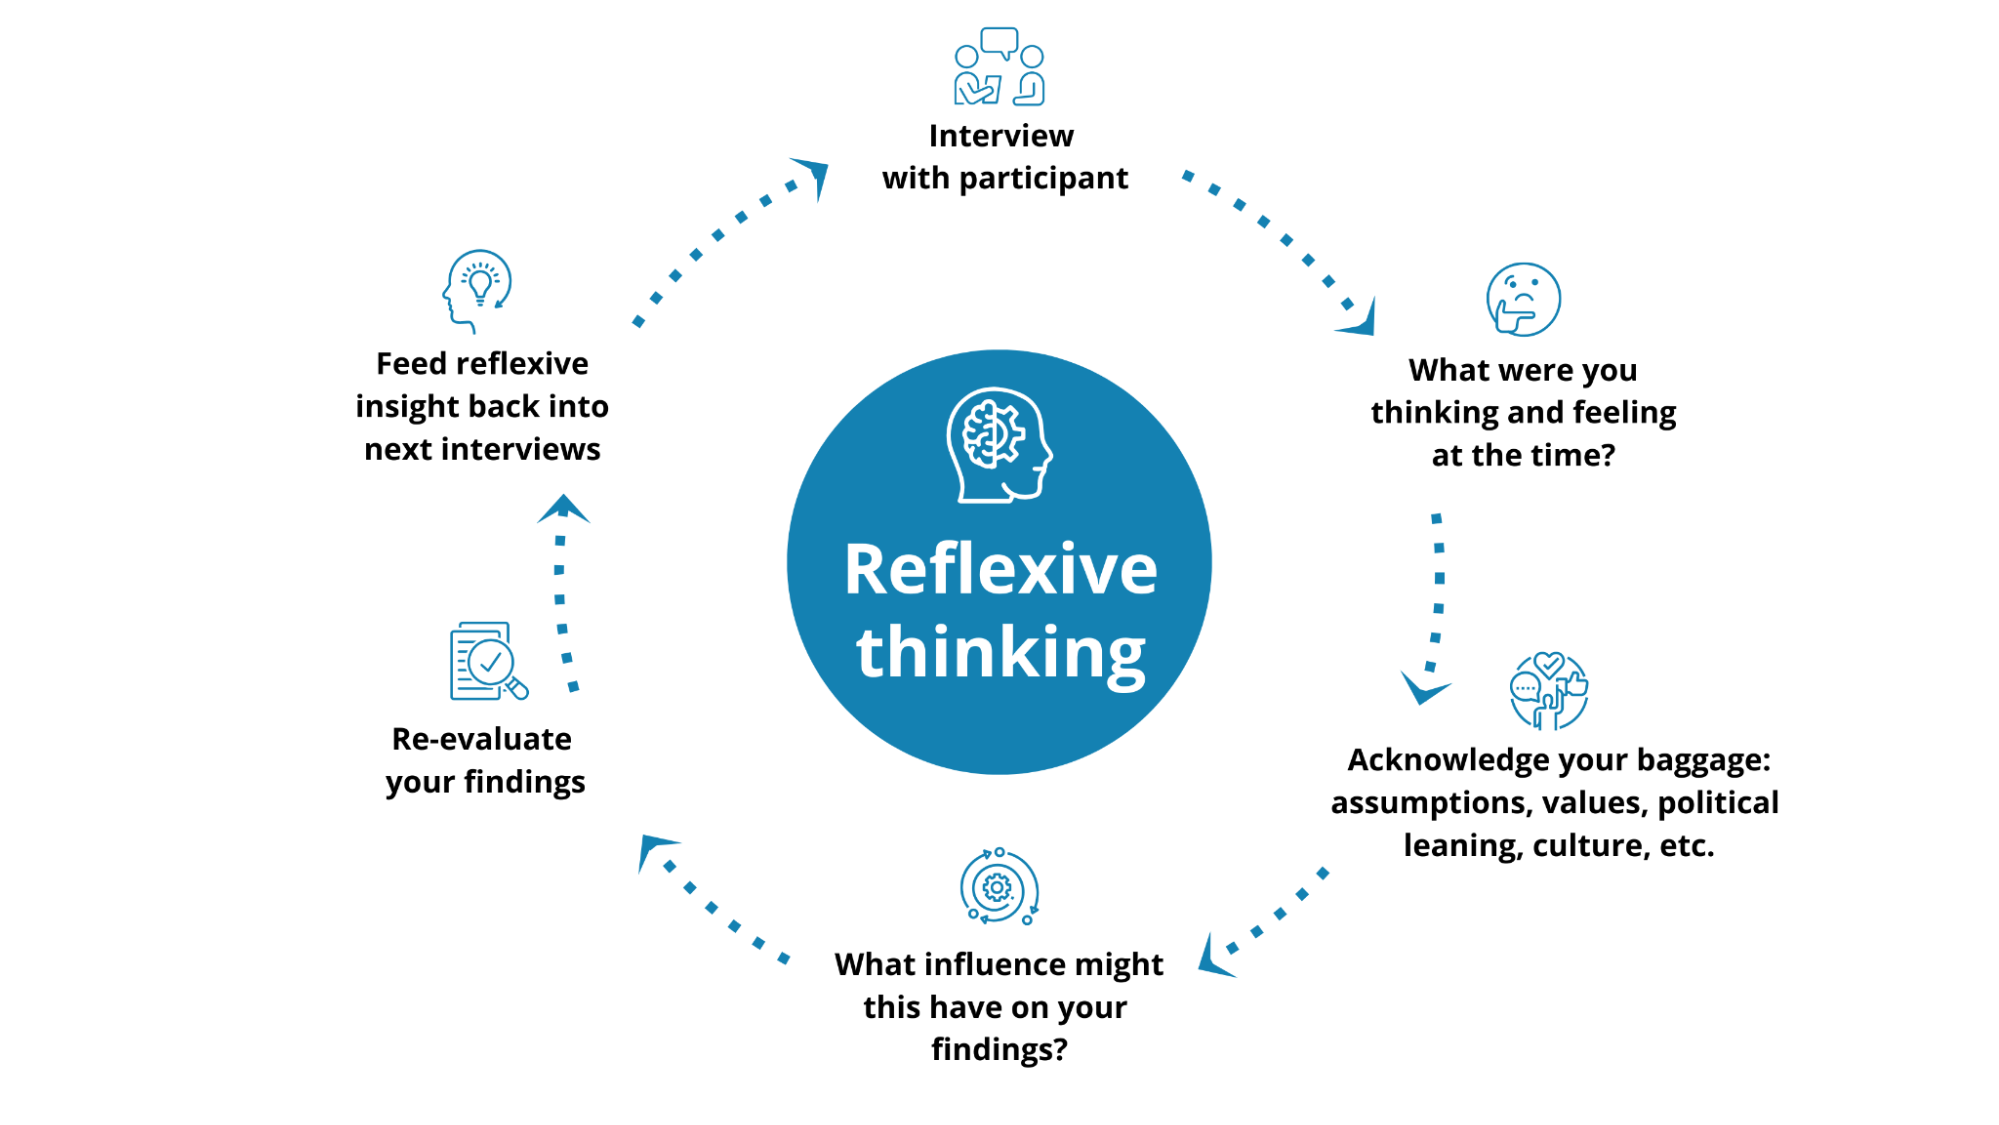 A graph showing a cycle of reflexive thinking. 1) interview with participant. 2) What were you thinking and feeling at the time? 3) Acknowledge your baggage: assumptions, values, political leaning, culture, etc. 4) What influence might this have on your findings? 5) Re-evaluate your findings. 6) Feed reflexive insight back into next interviews.